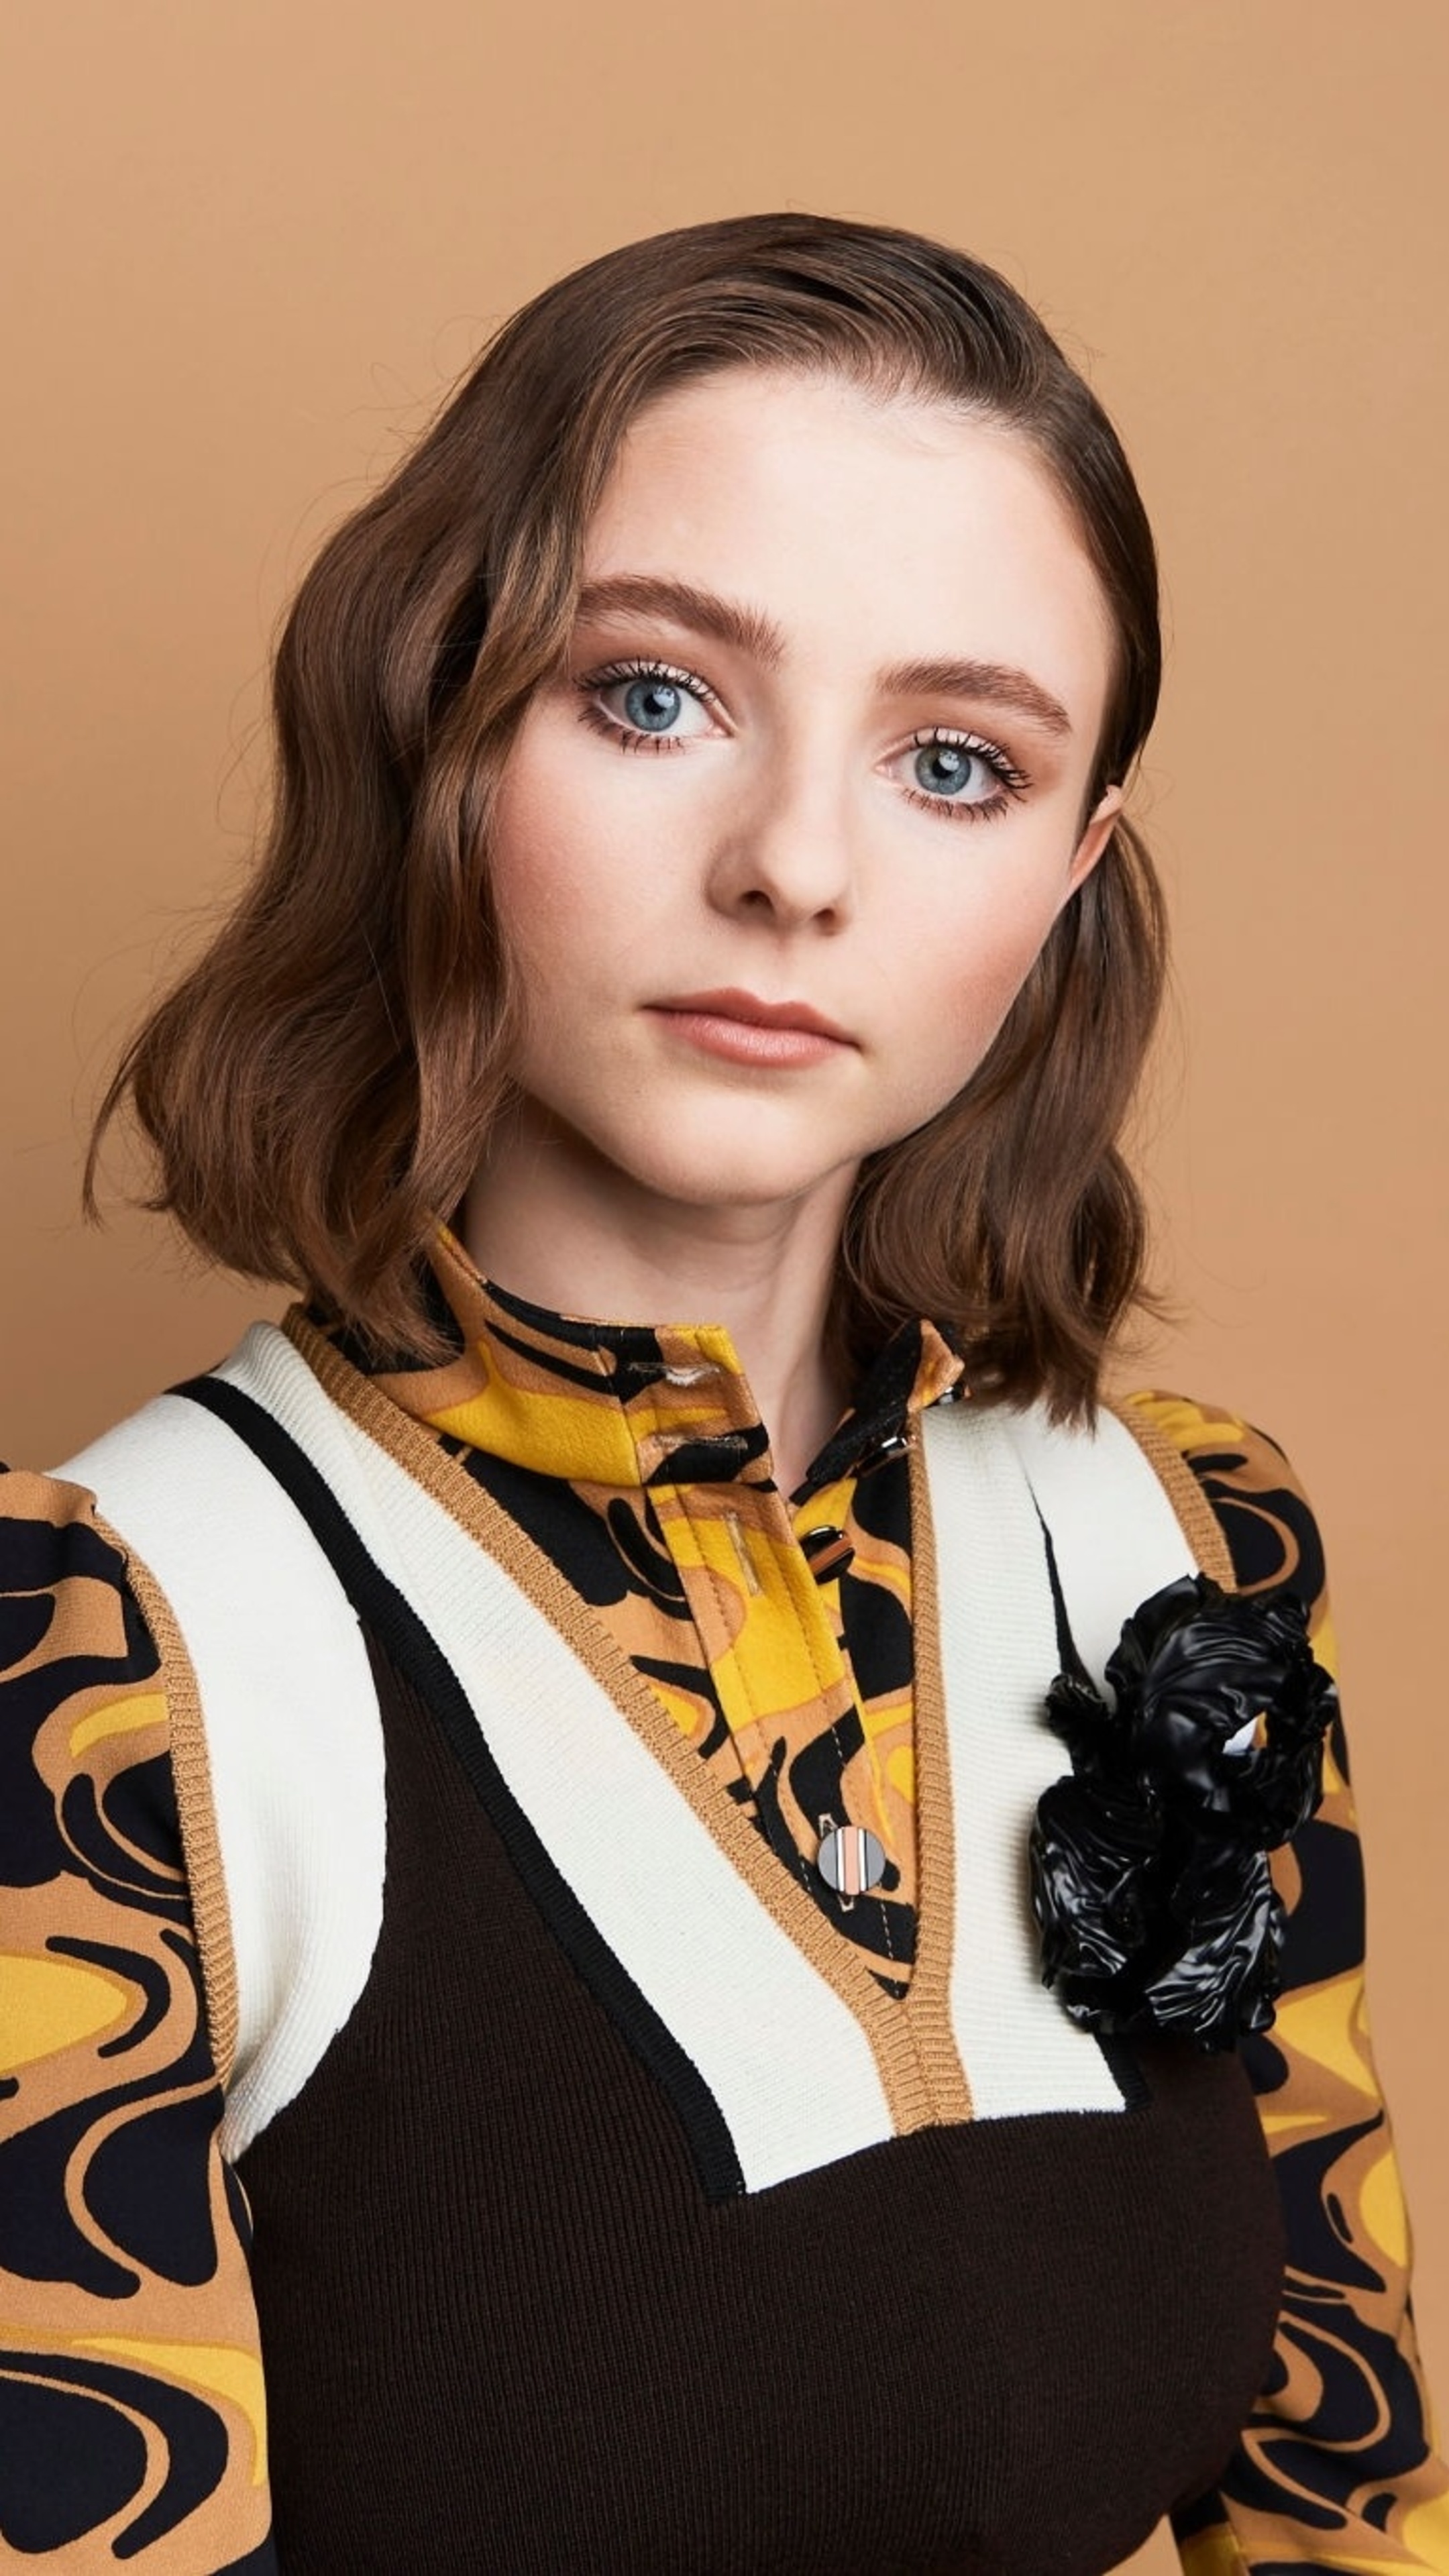 Thomasin McKenzie Sony Xperia wallpapers, HD 4K images, Movies, 2160x3840 4K Phone